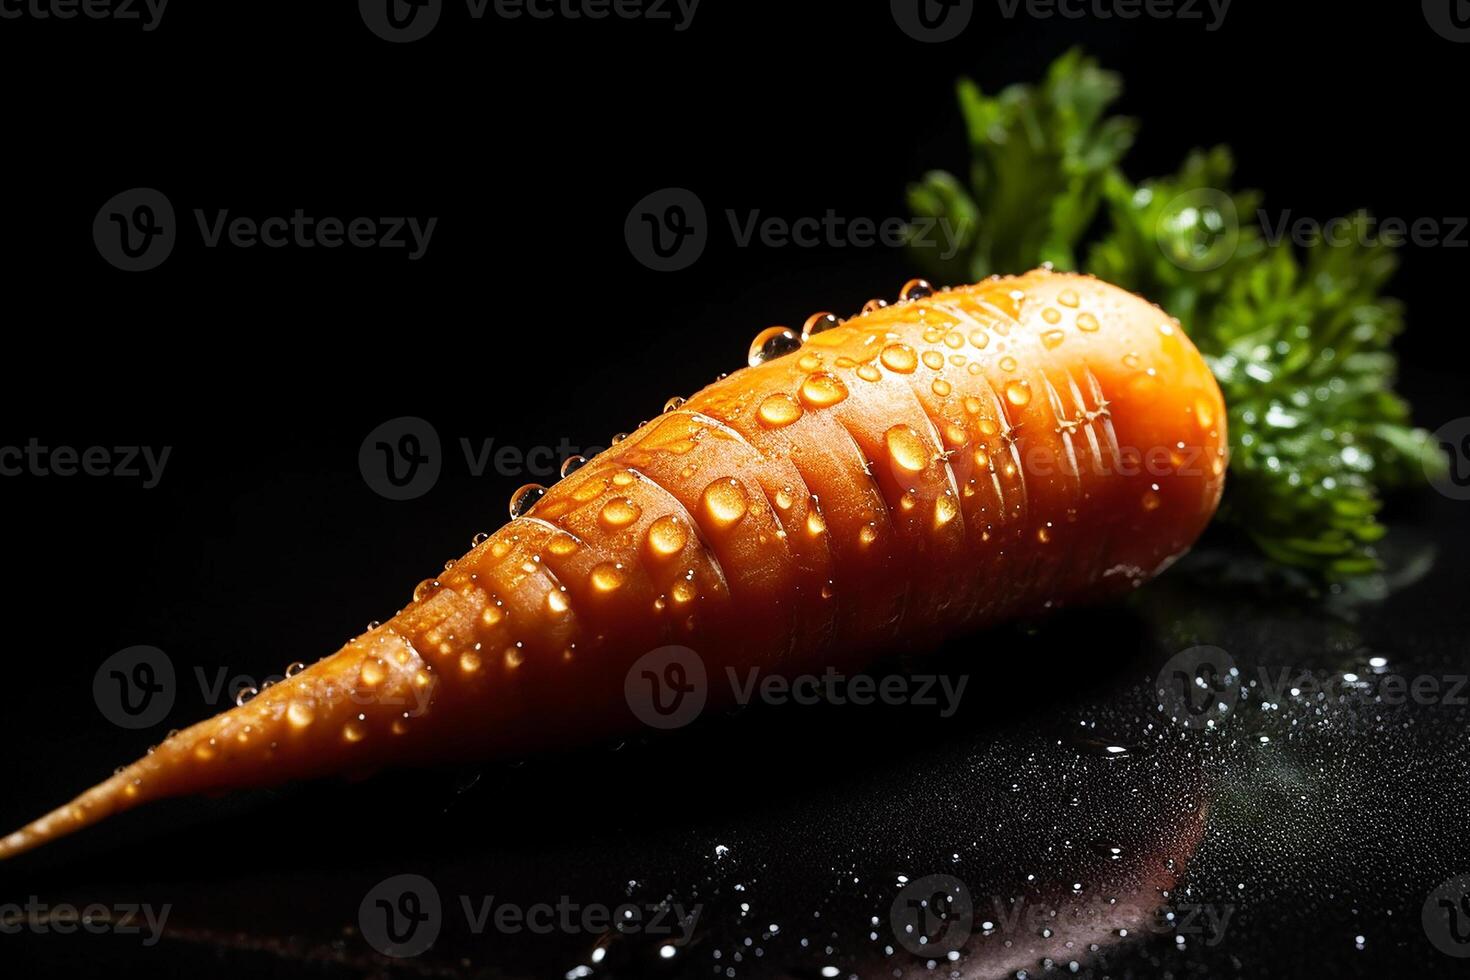 Carrots covered in water droplets. Studio light. Black background. photo